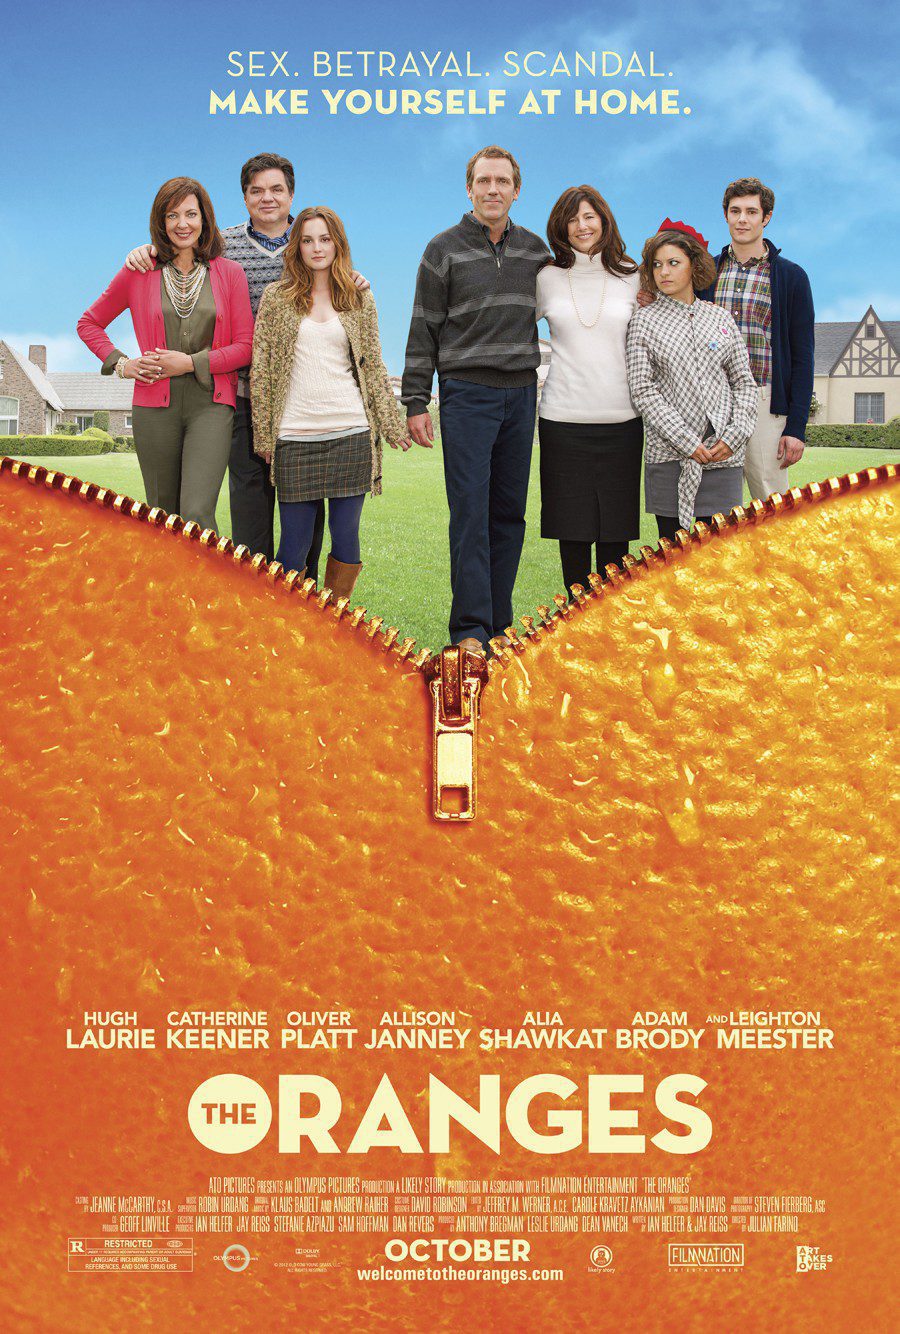 Poster of The Oranges - EEUU